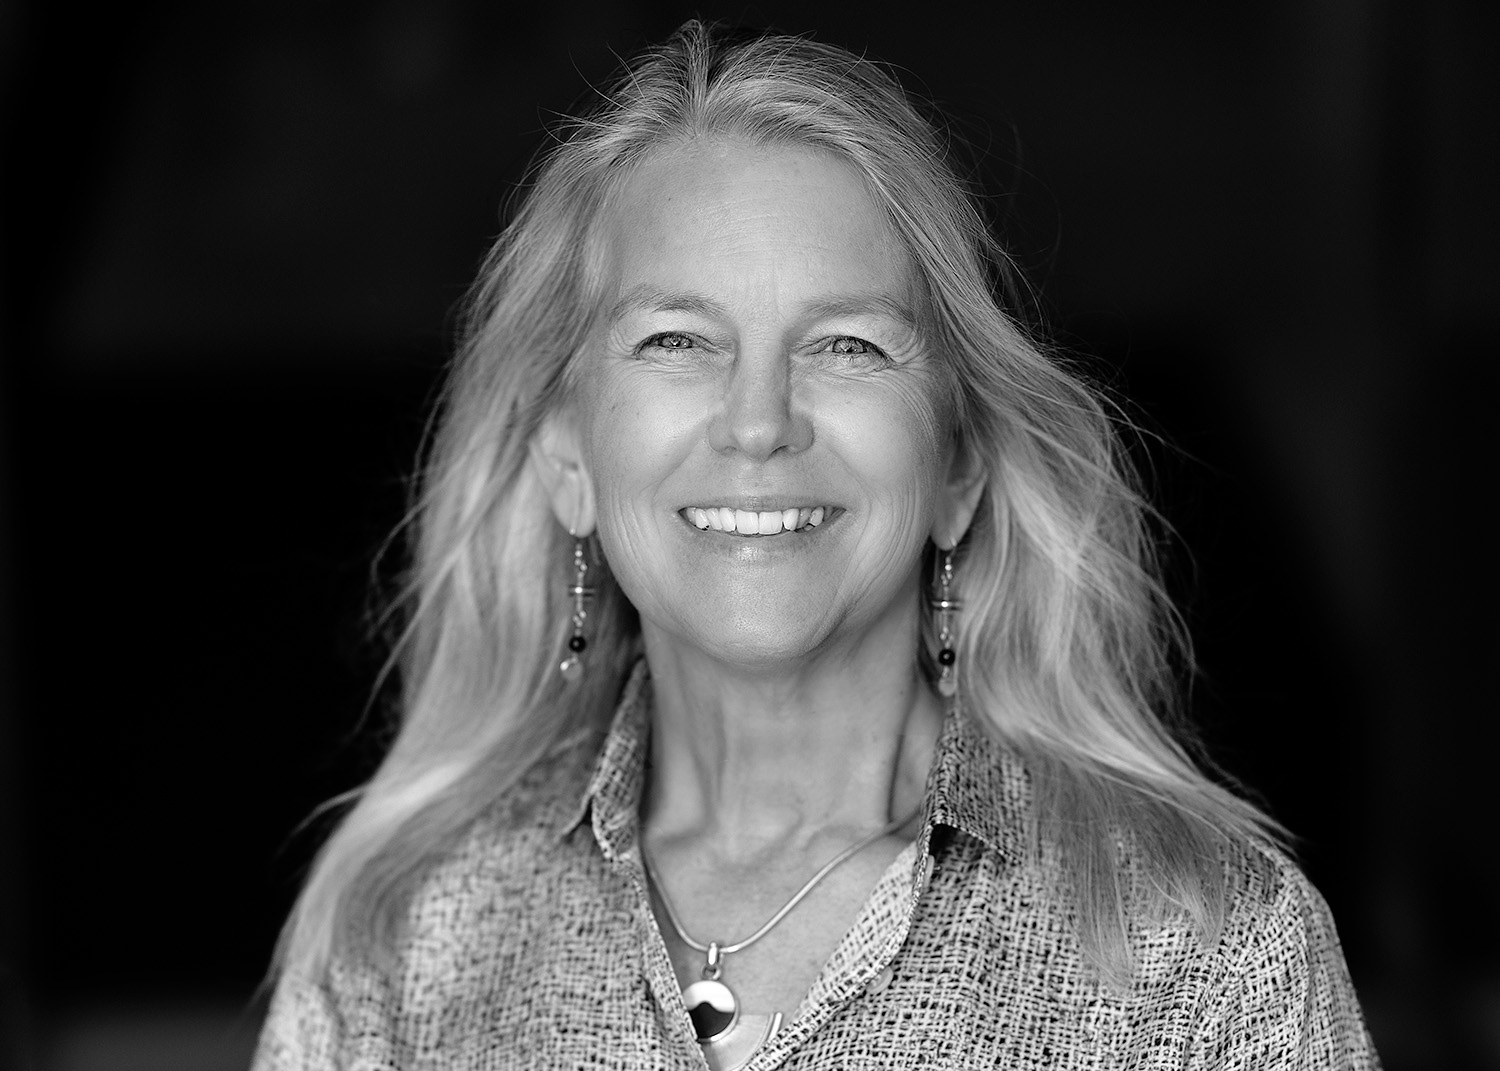 A black and white headshot of Dava Newman. She faces the camera with a big smile. She has long hair. She wears hanging earrings, a necklace with circular shapes, and a patterned button-down shirt.